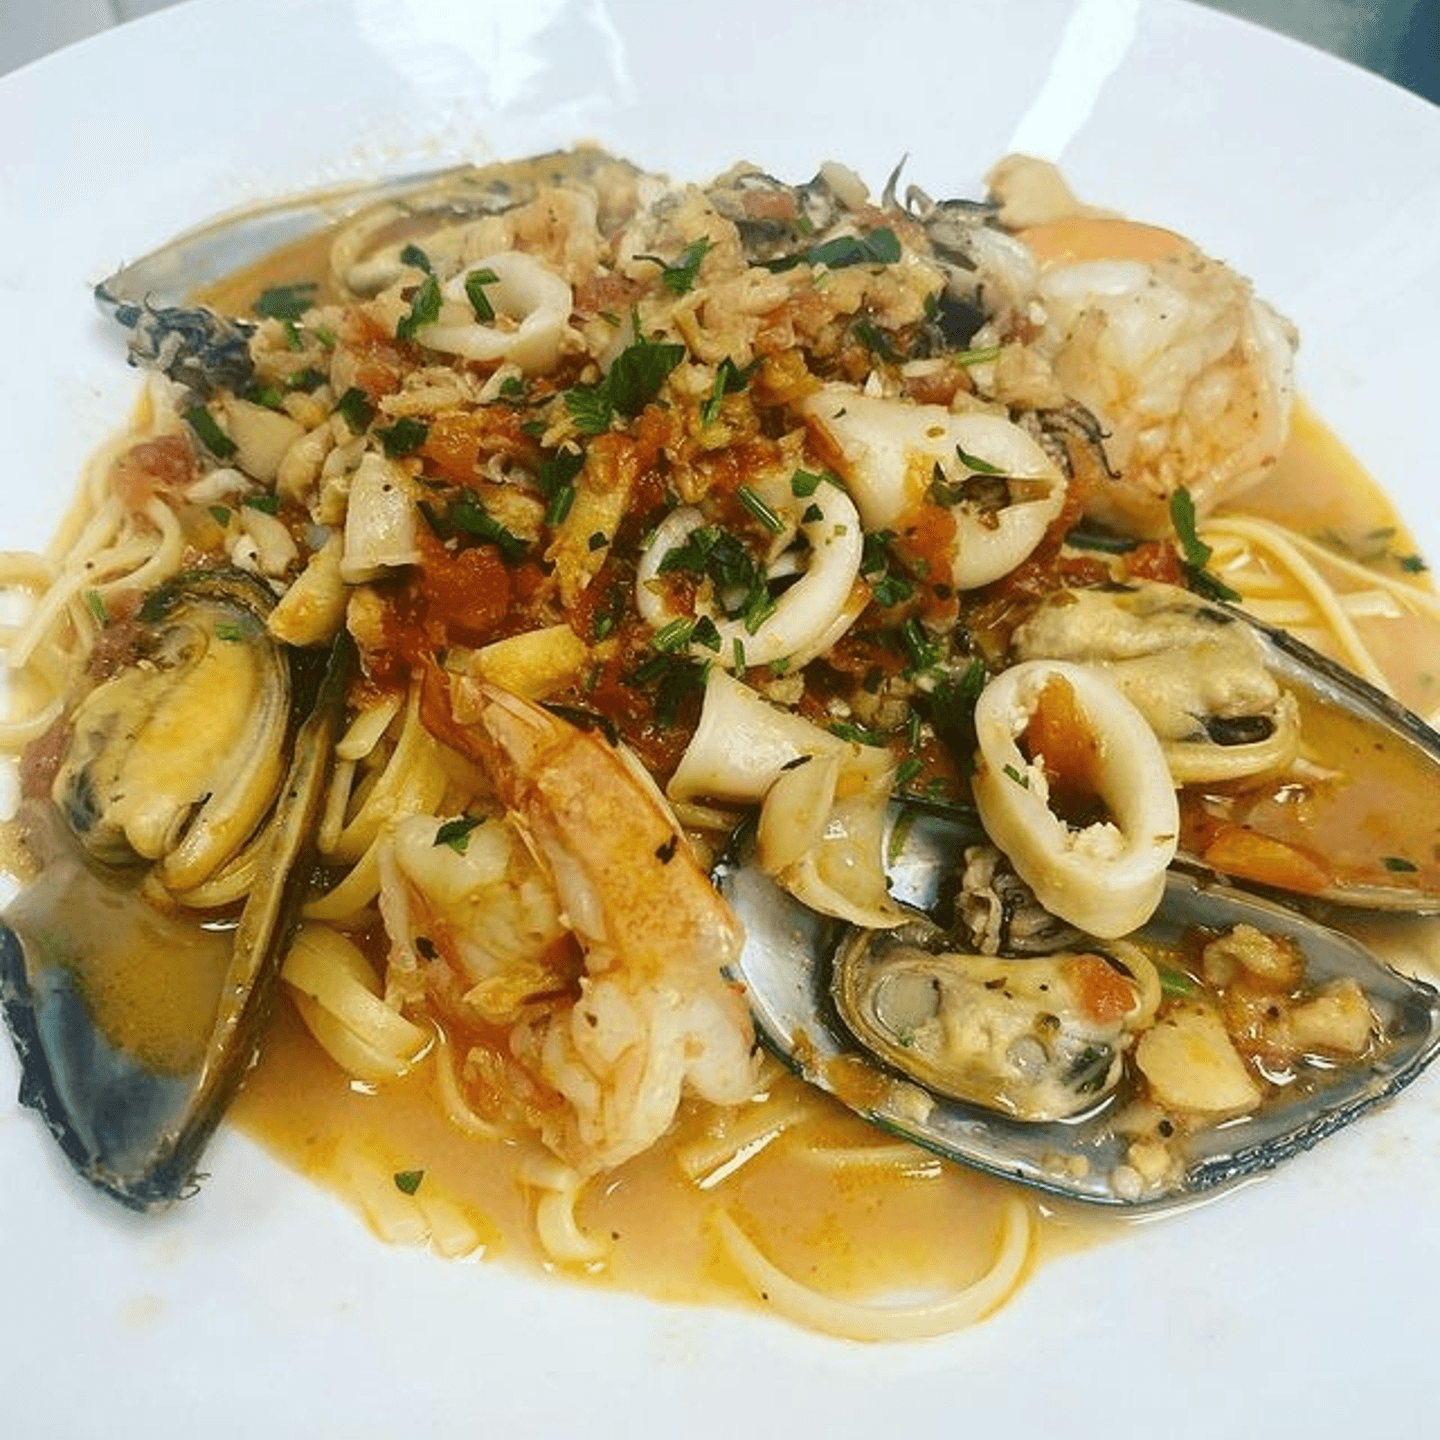 Mixed Seafood Pasta and More!